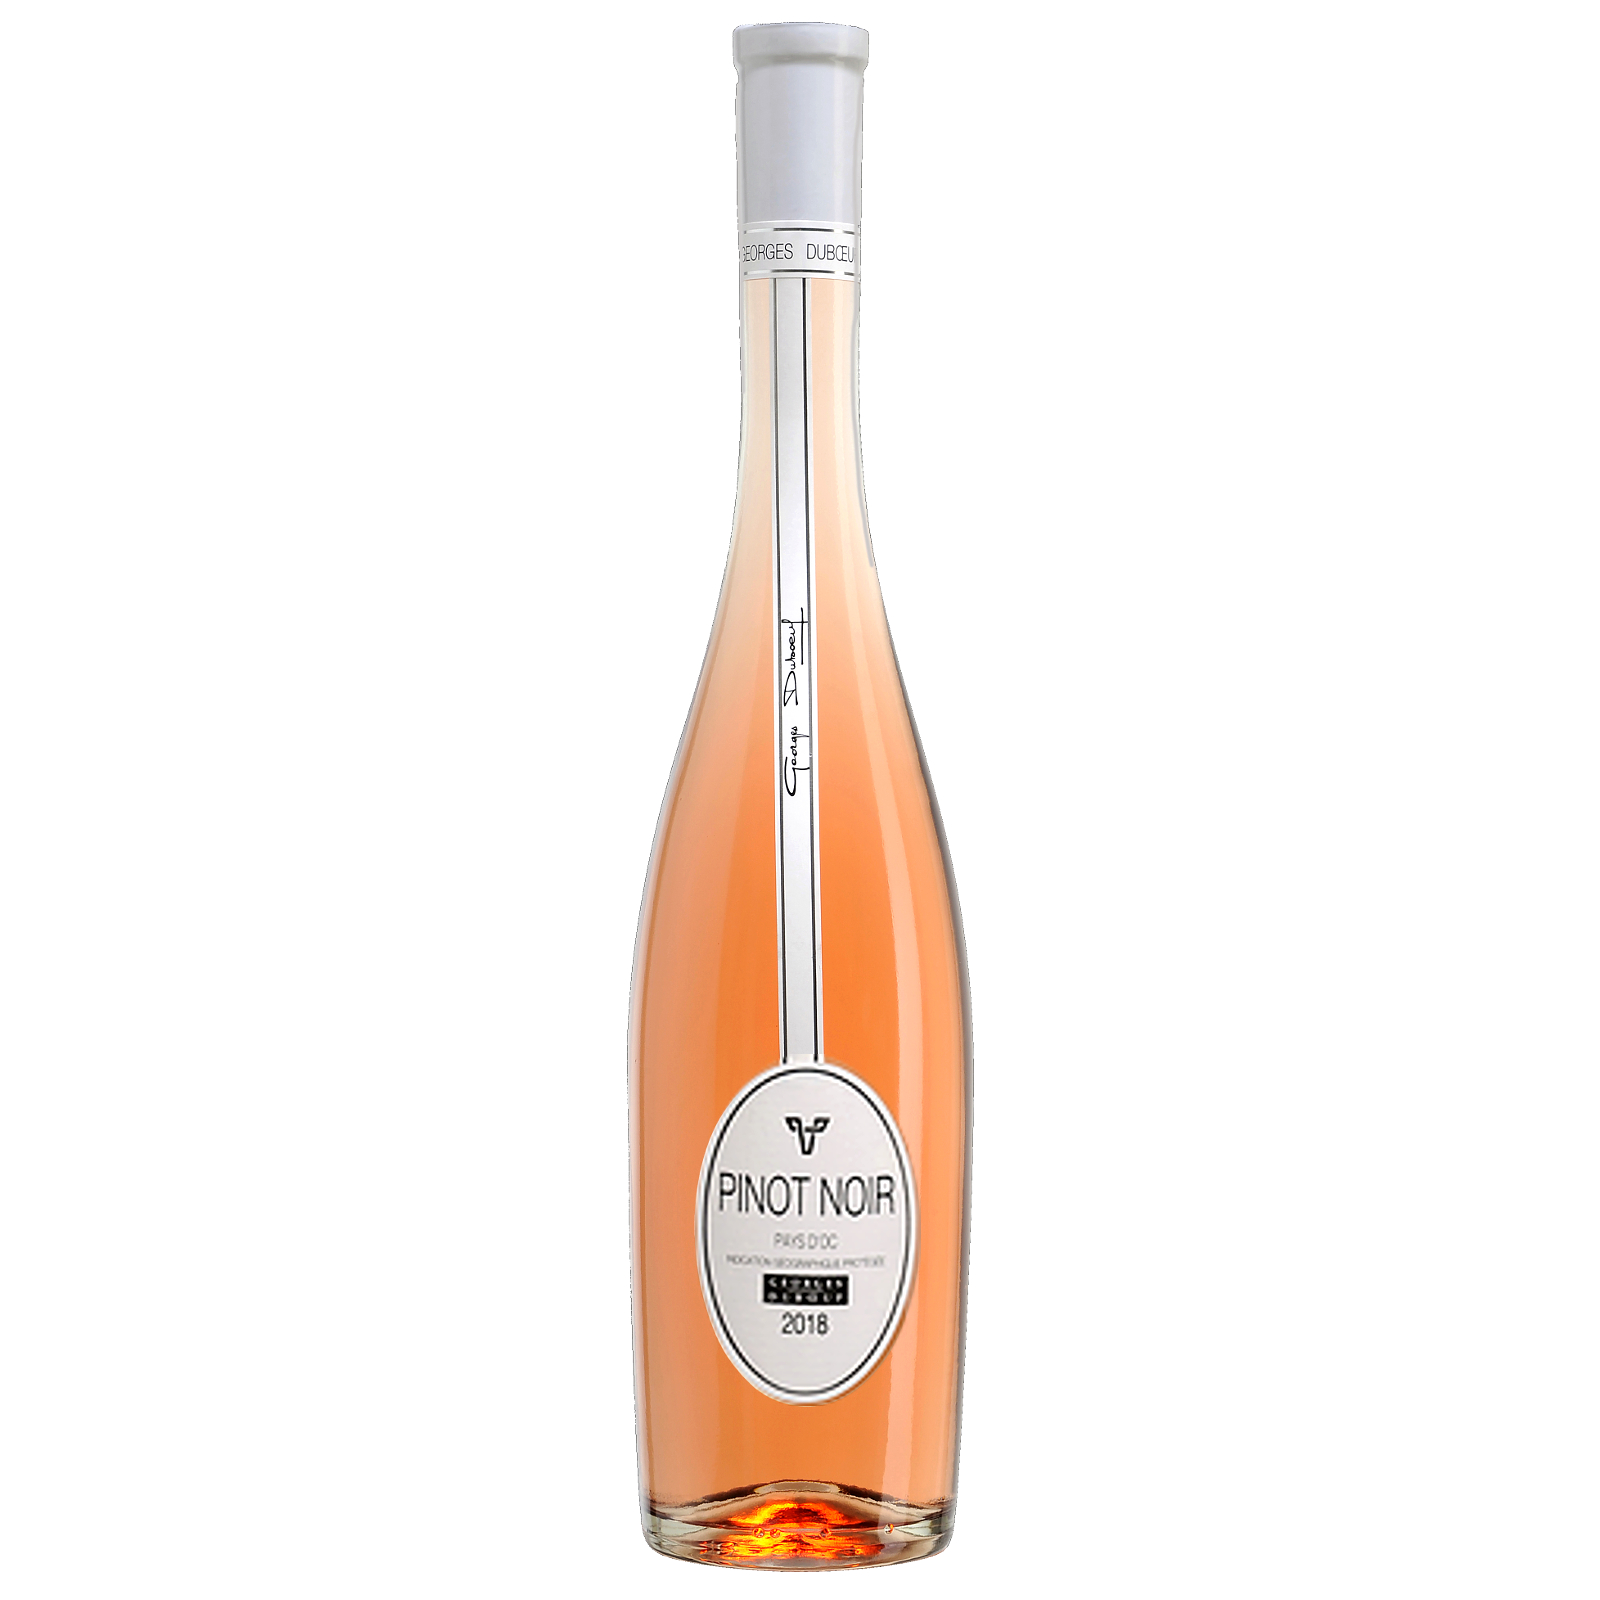 Georges Duboeuf Pinot Noir Rose 2019 Rose Wine – Burgundy France